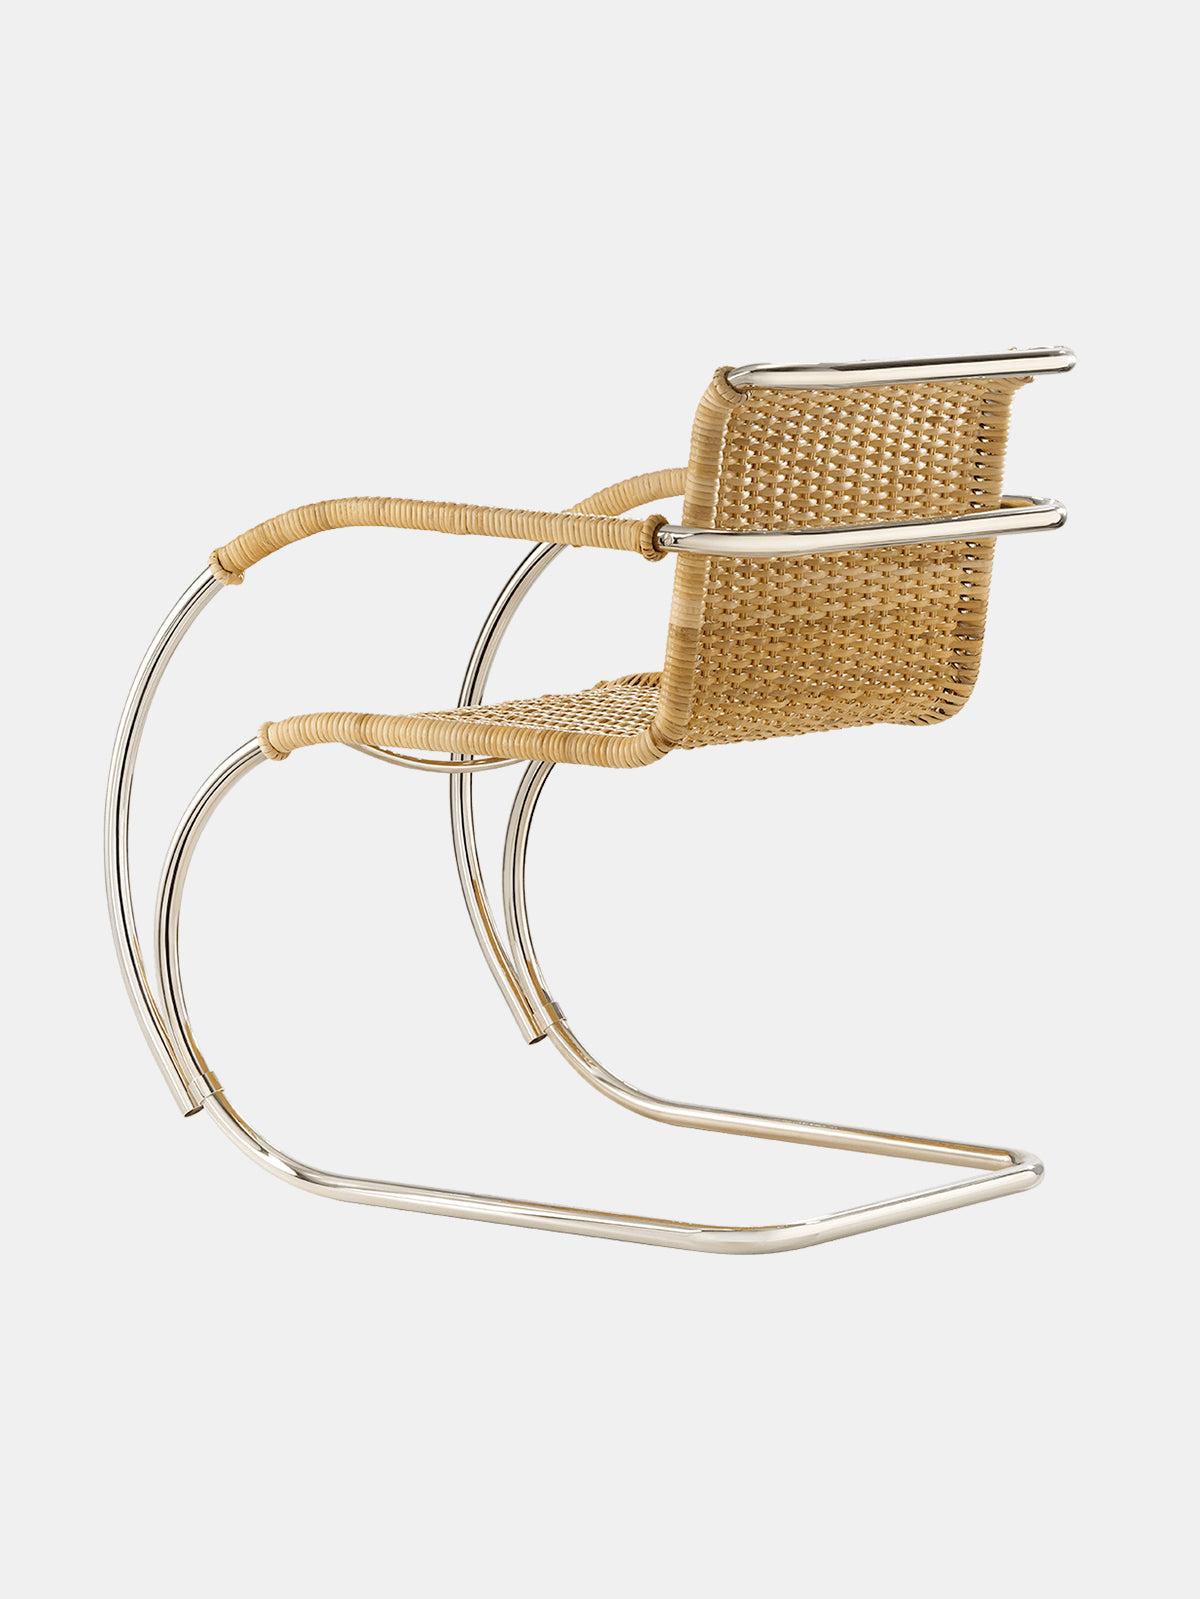 D42 Cantilever Chair With Armrests designed by  Mies Van der Rohe